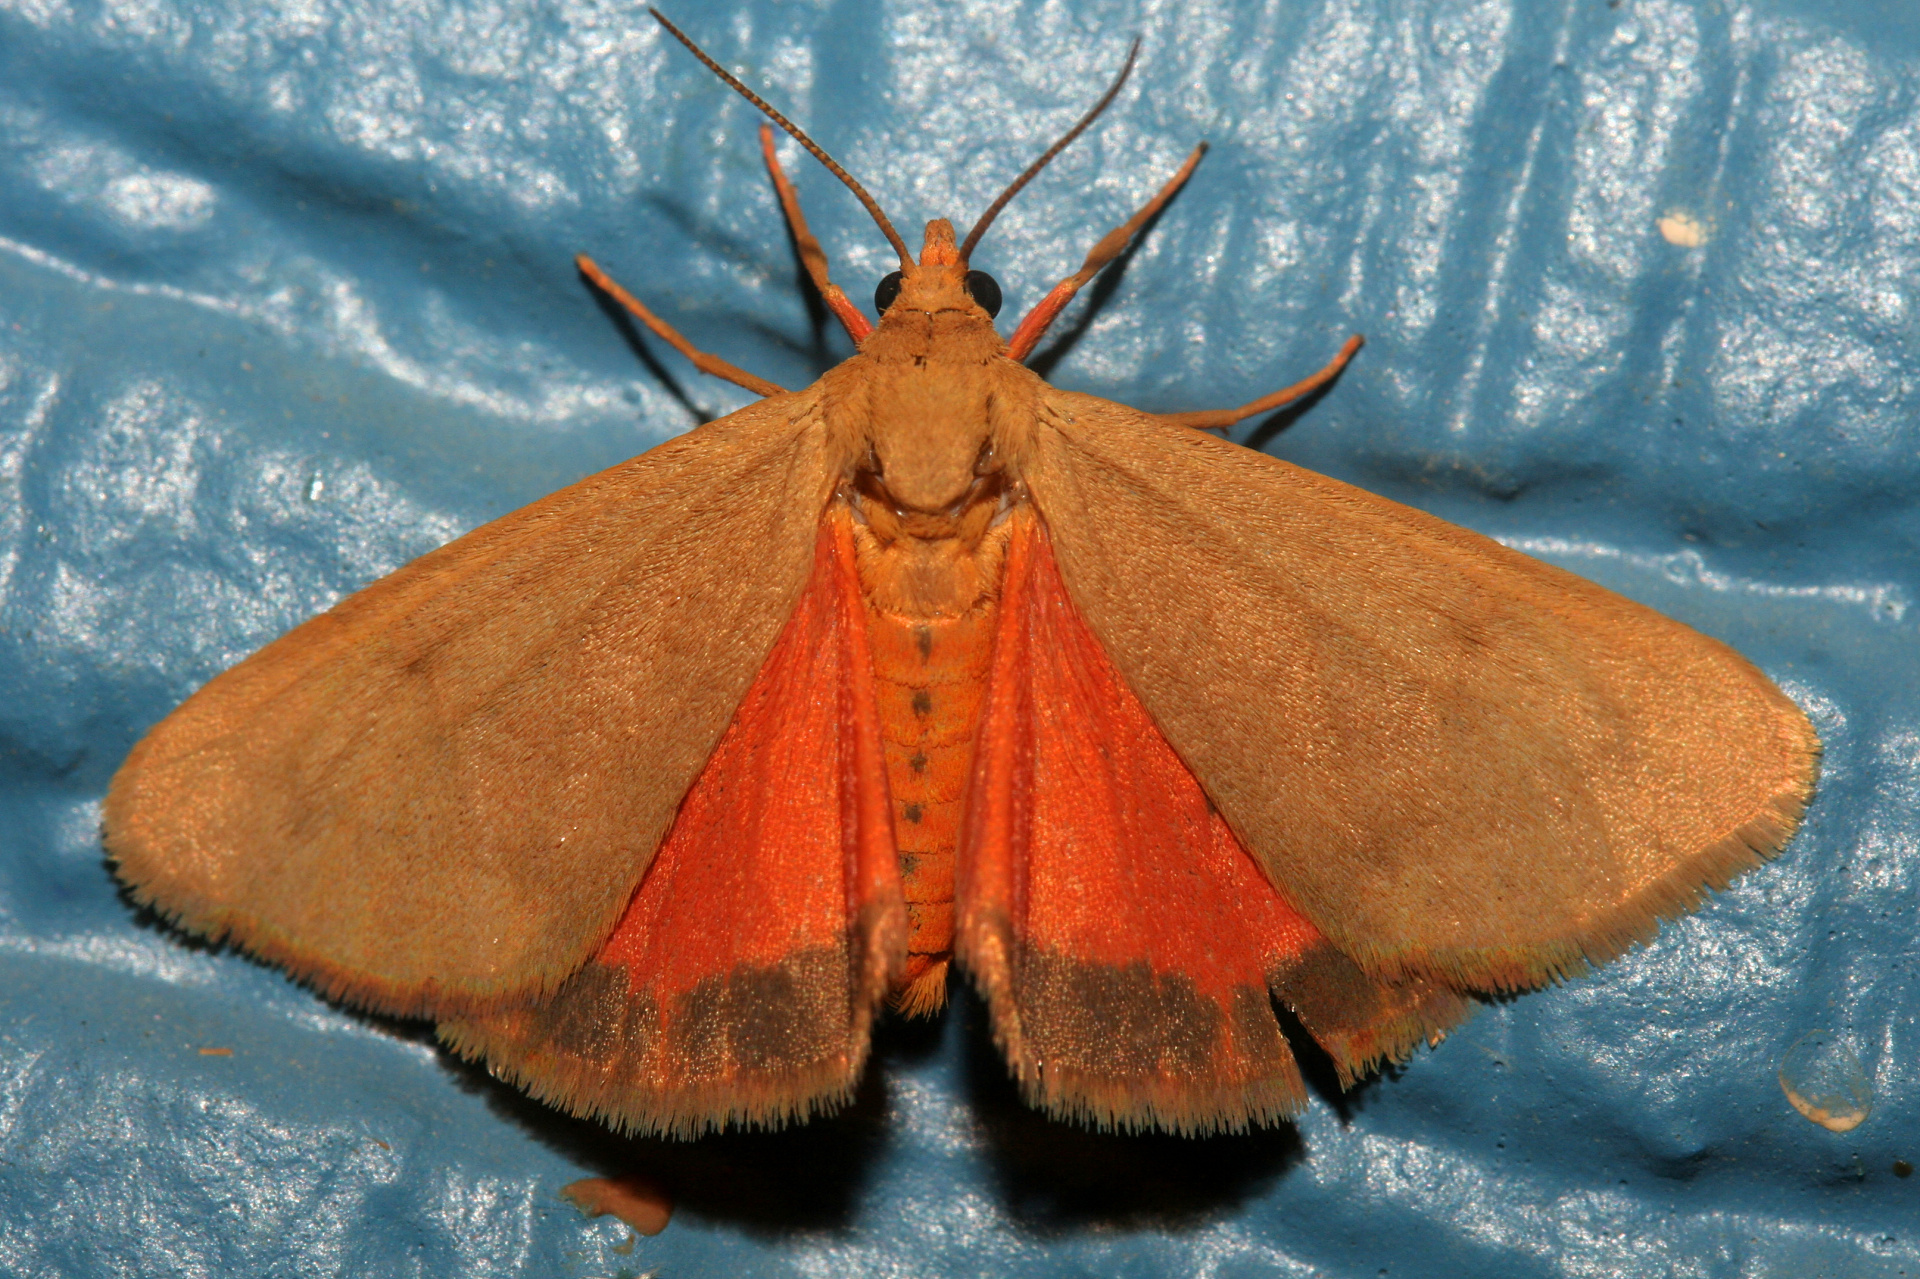 Holomelina aurantiaca (Travels » US Trip 2: Cheyenne Epic » Animals » Insects » Butterfies and Moths » Arctiidae)